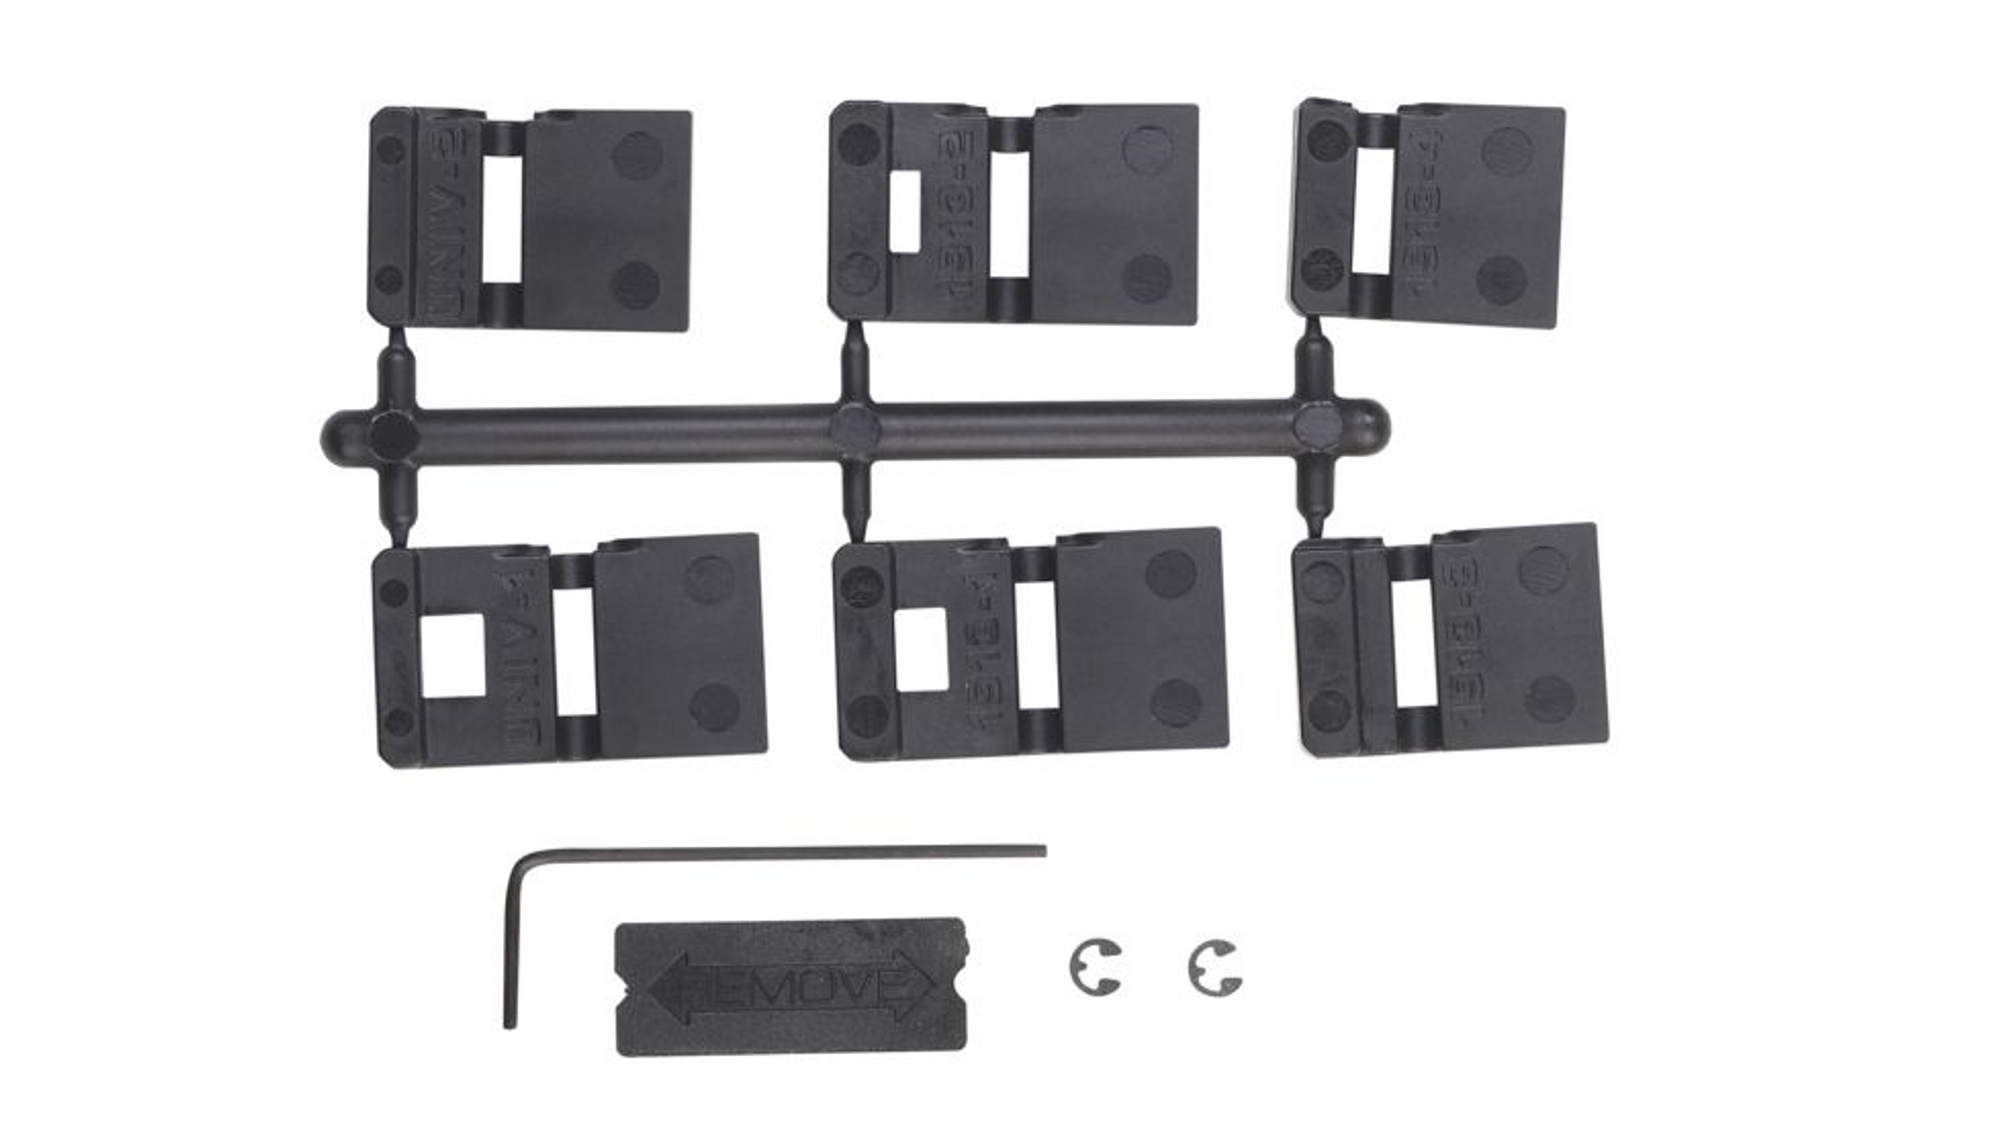 Key Kit - Tlr-7/tlr-8 - Includes Rail Locating Keys For Universal Or 1913 Picatinny Style Rails And Mounting Tools